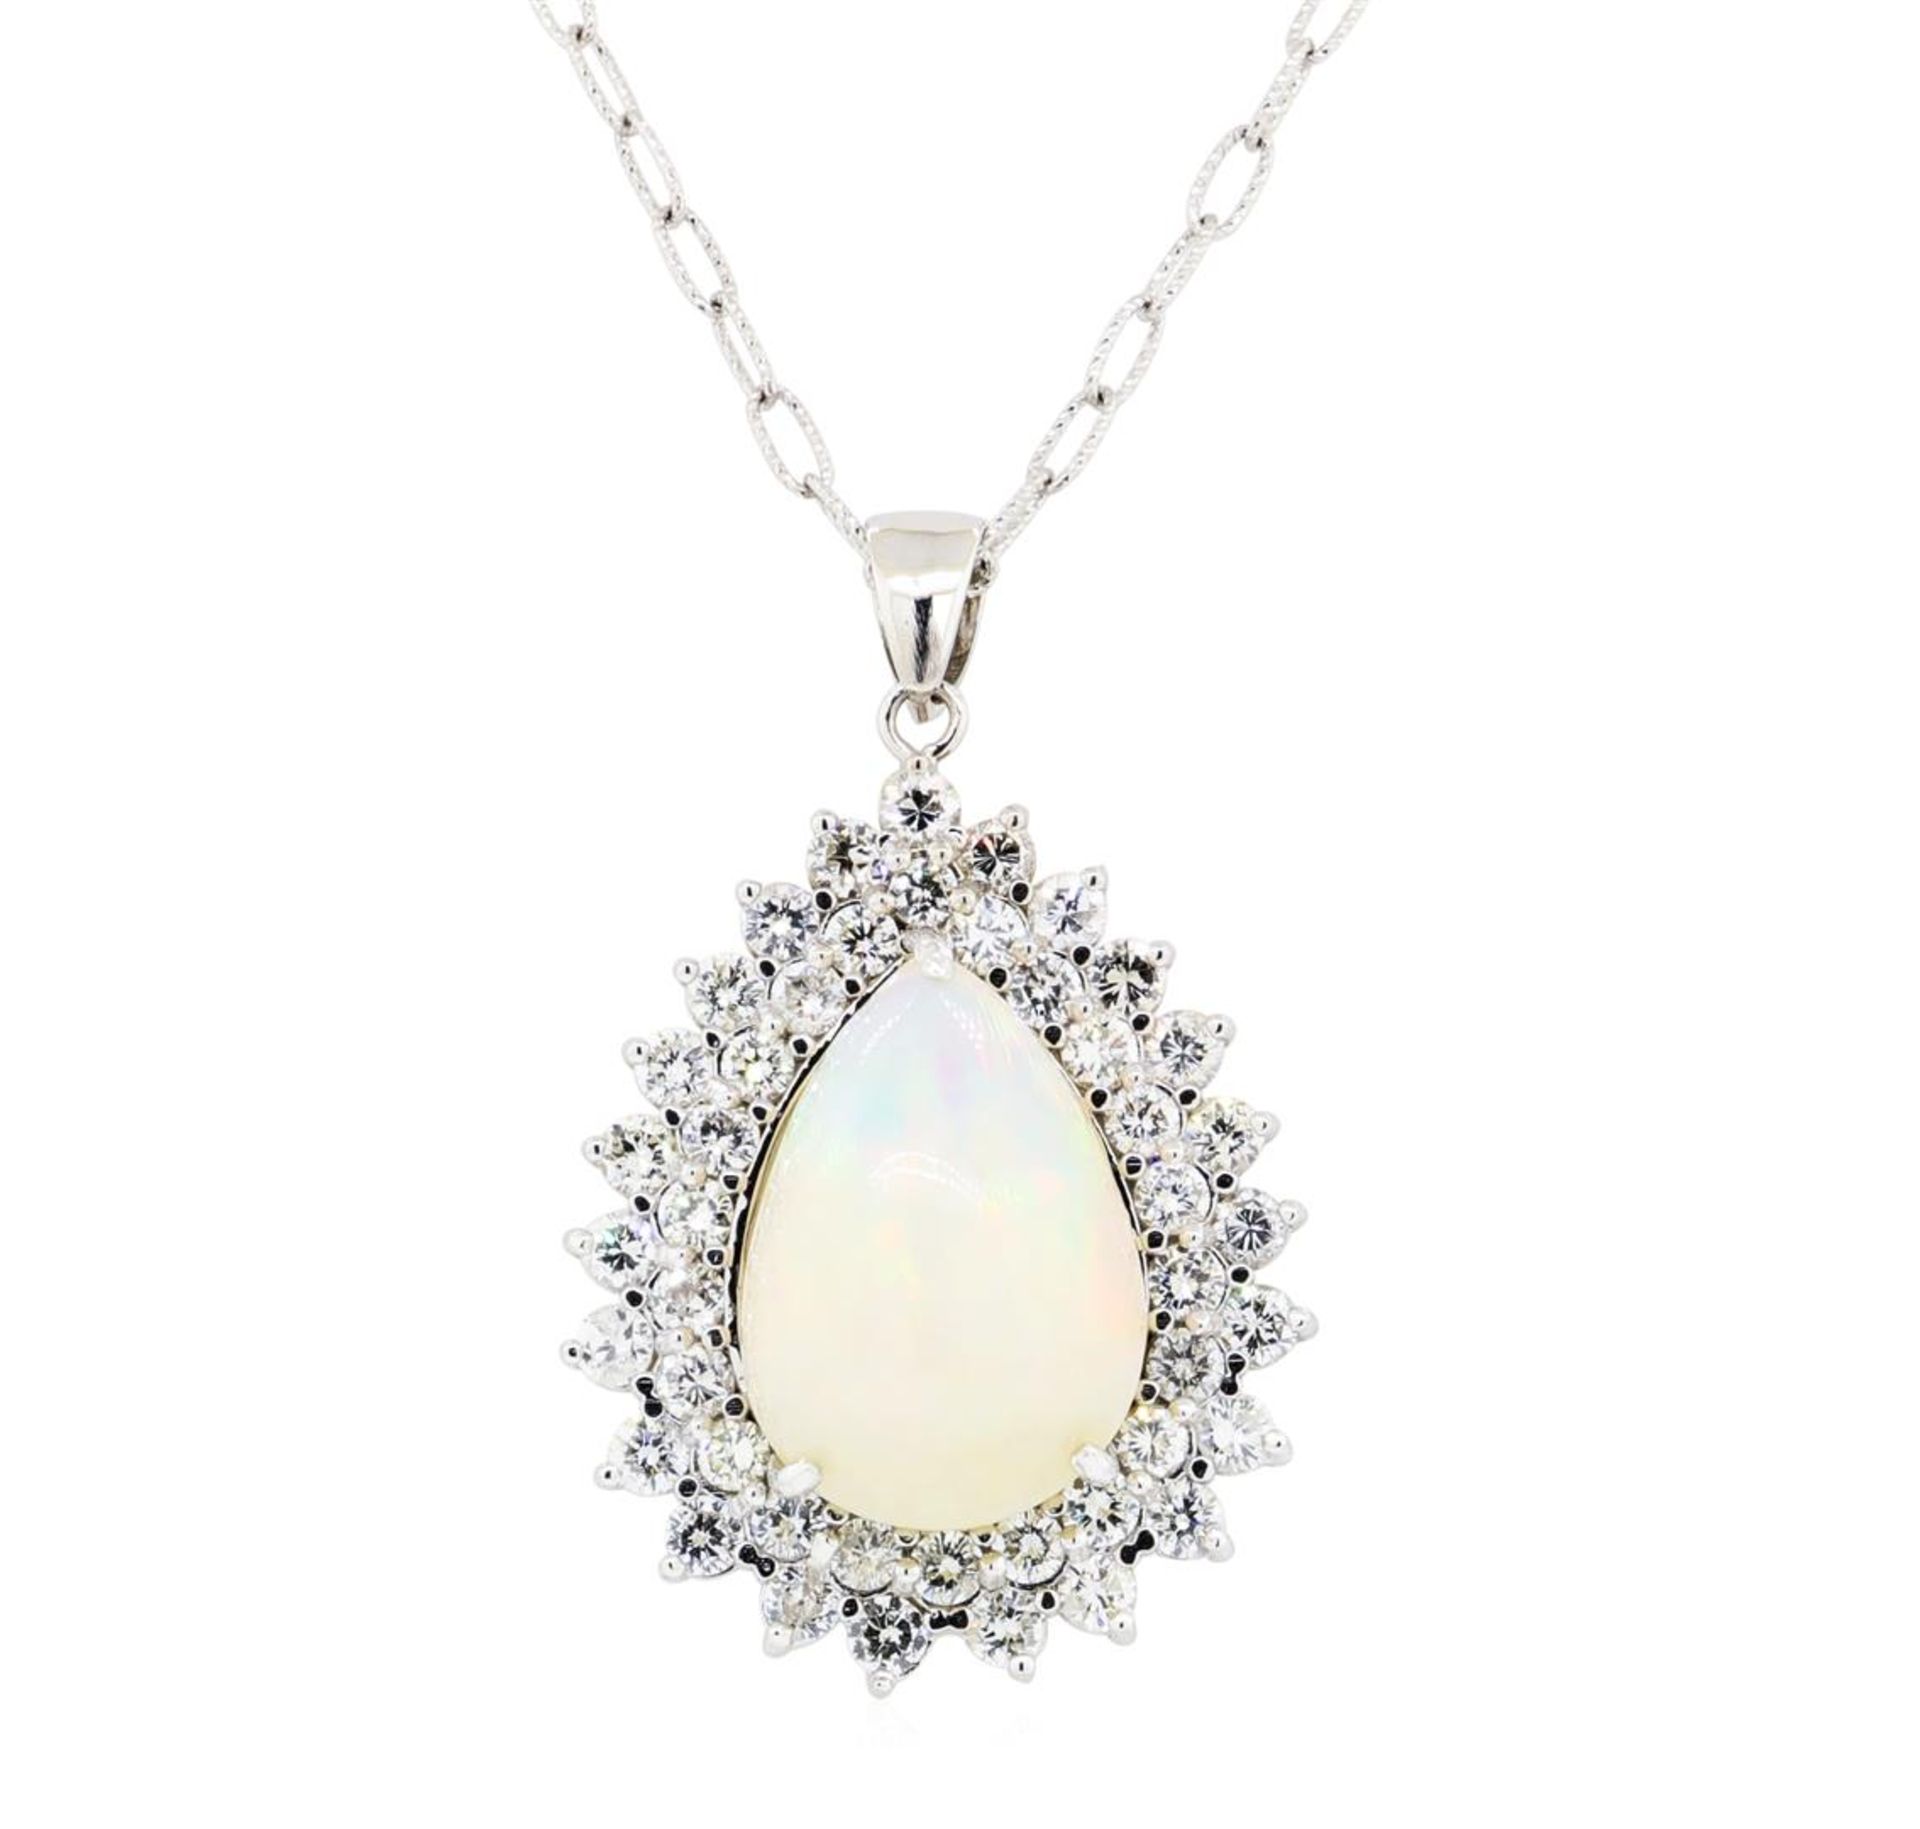 16.34 ctw Opal And Diamond Pendant & Chain - 14KT White Gold - Image 2 of 3